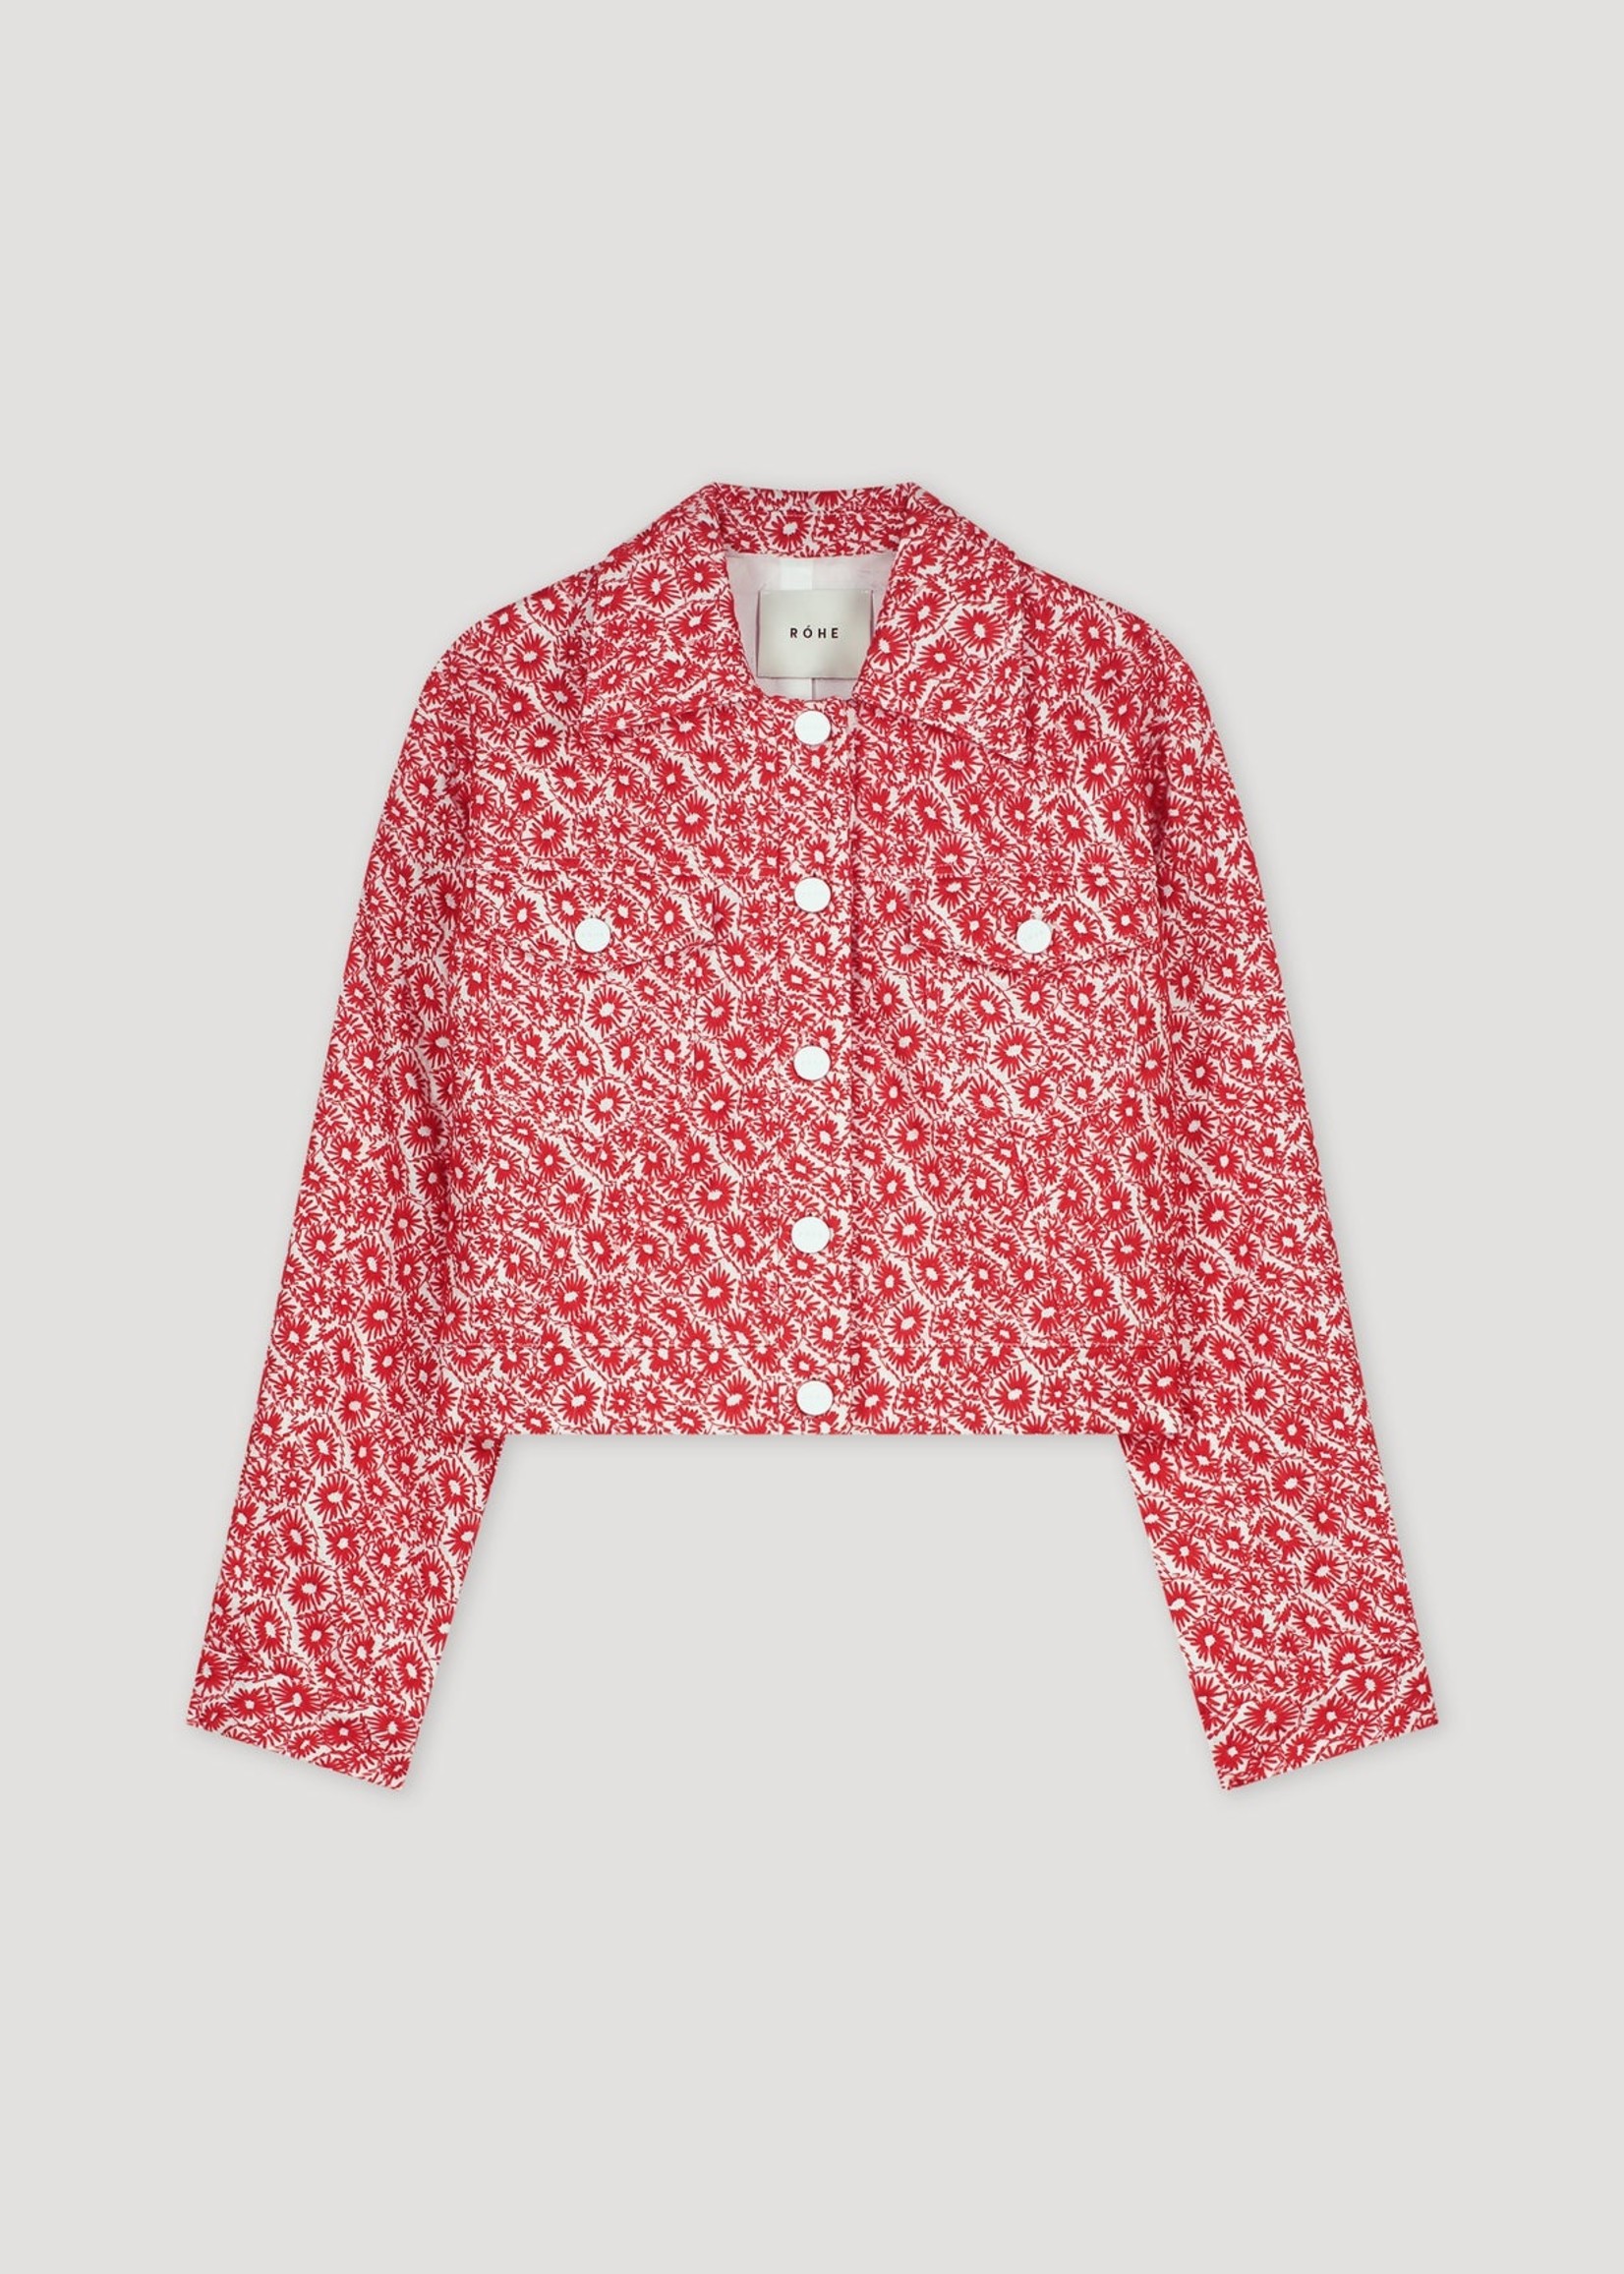 ROHE EMBROIDERED FLORAL DENIM JACKET